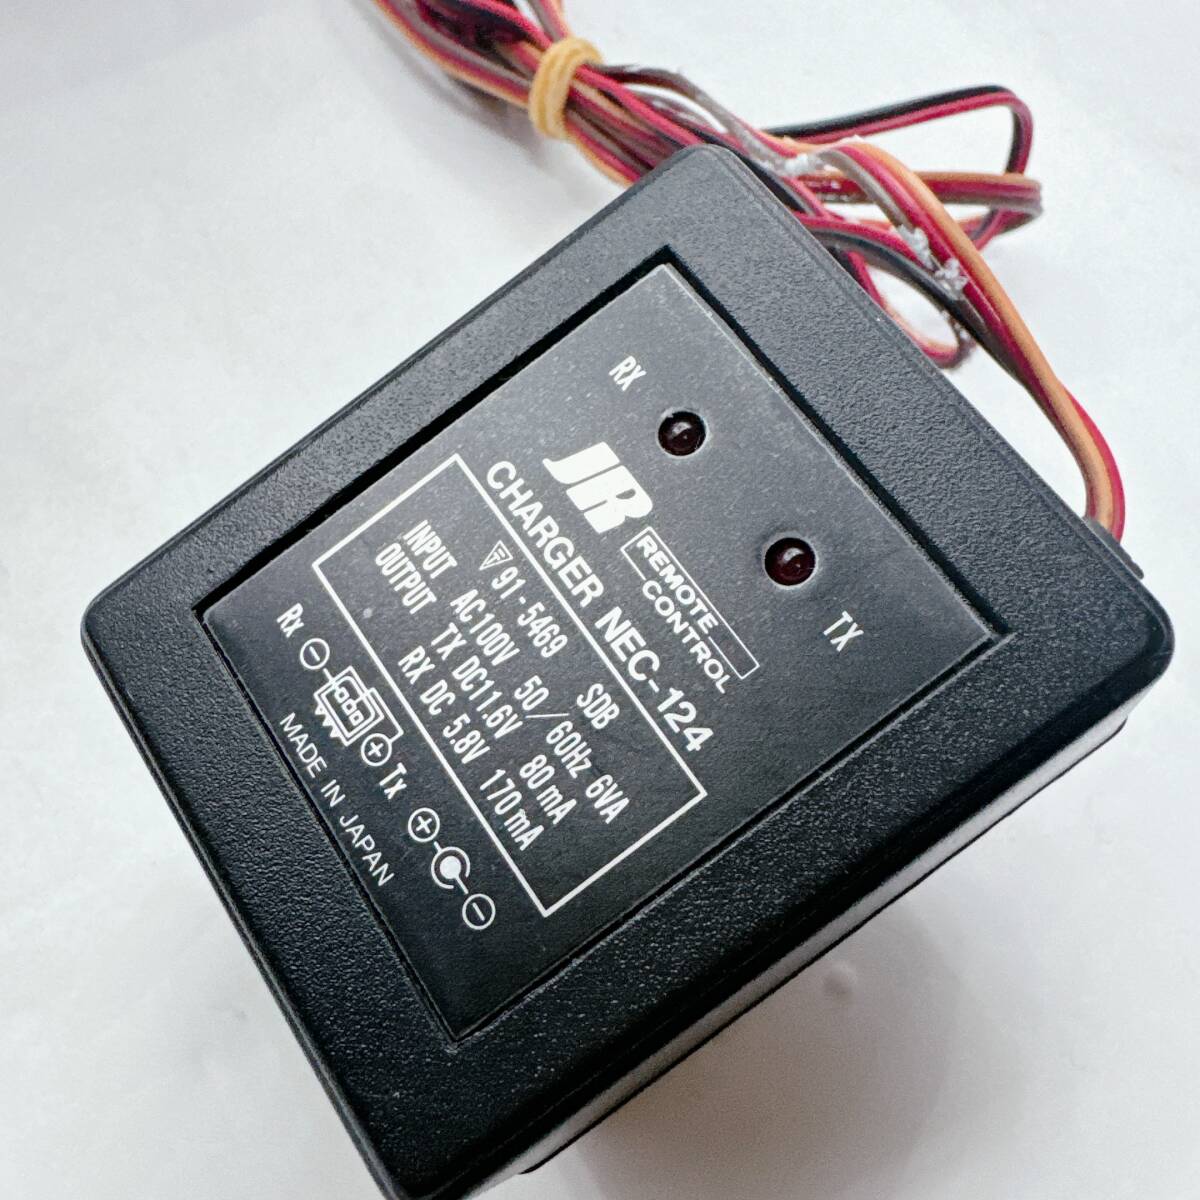 JR PROPO X-3810 power supply has confirmed radio-controller remote control helicopter box equipped present condition 